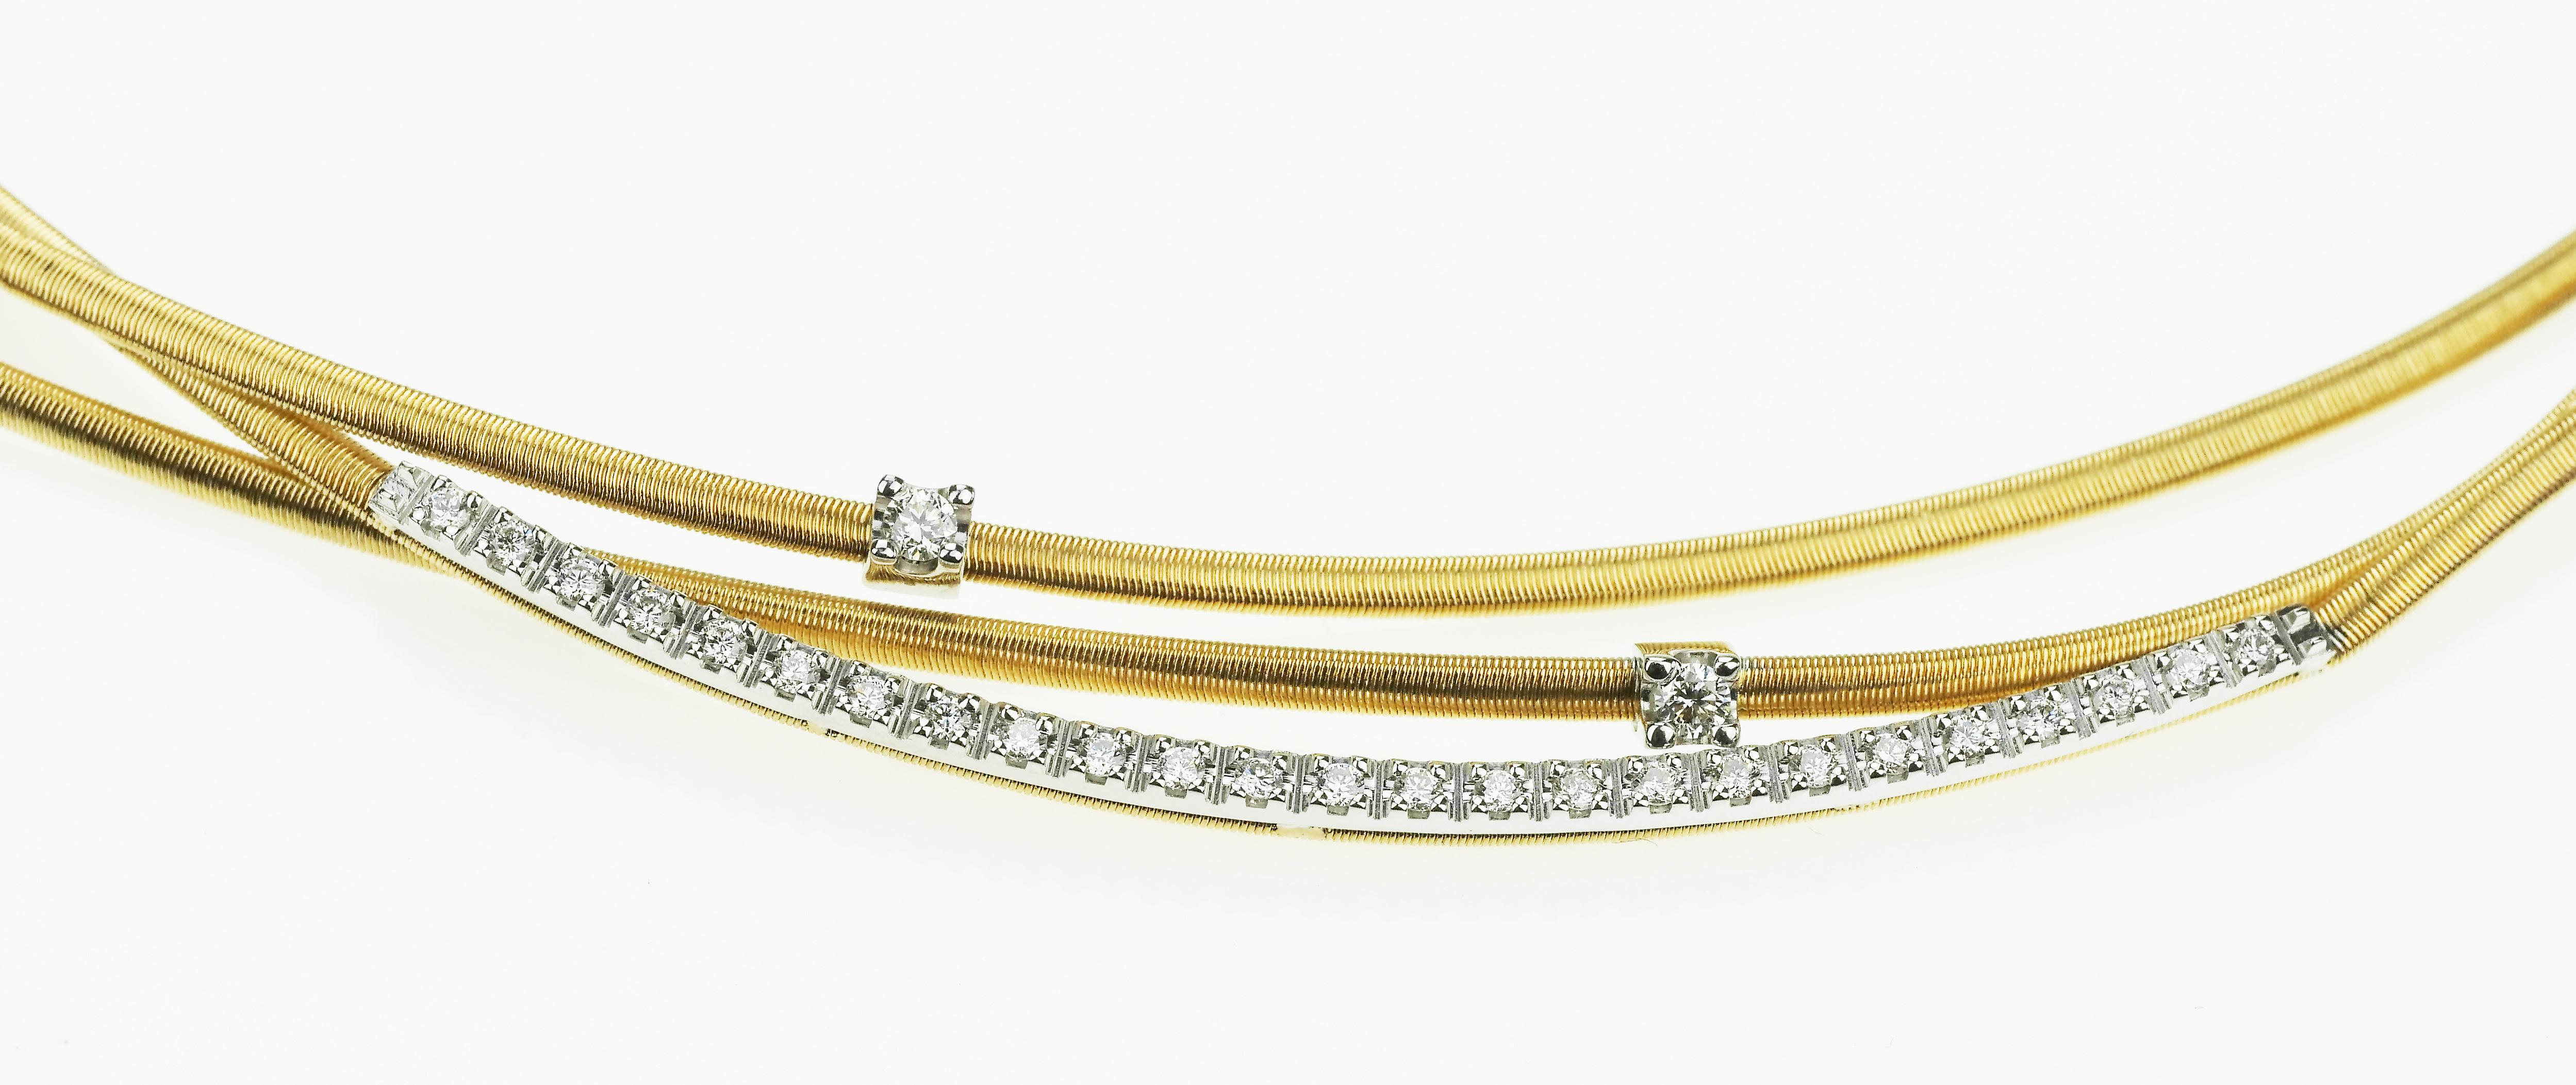 Marco Bicego 18 ct Yellow Gold Three Strand Diamond Set Necklace. 
This beautiful Marco Bicego necklace is hand made with the Corda di chitarra technique and set with round brilliant cut diamonds.
27 diamonds approximate total diamond weight 0.35